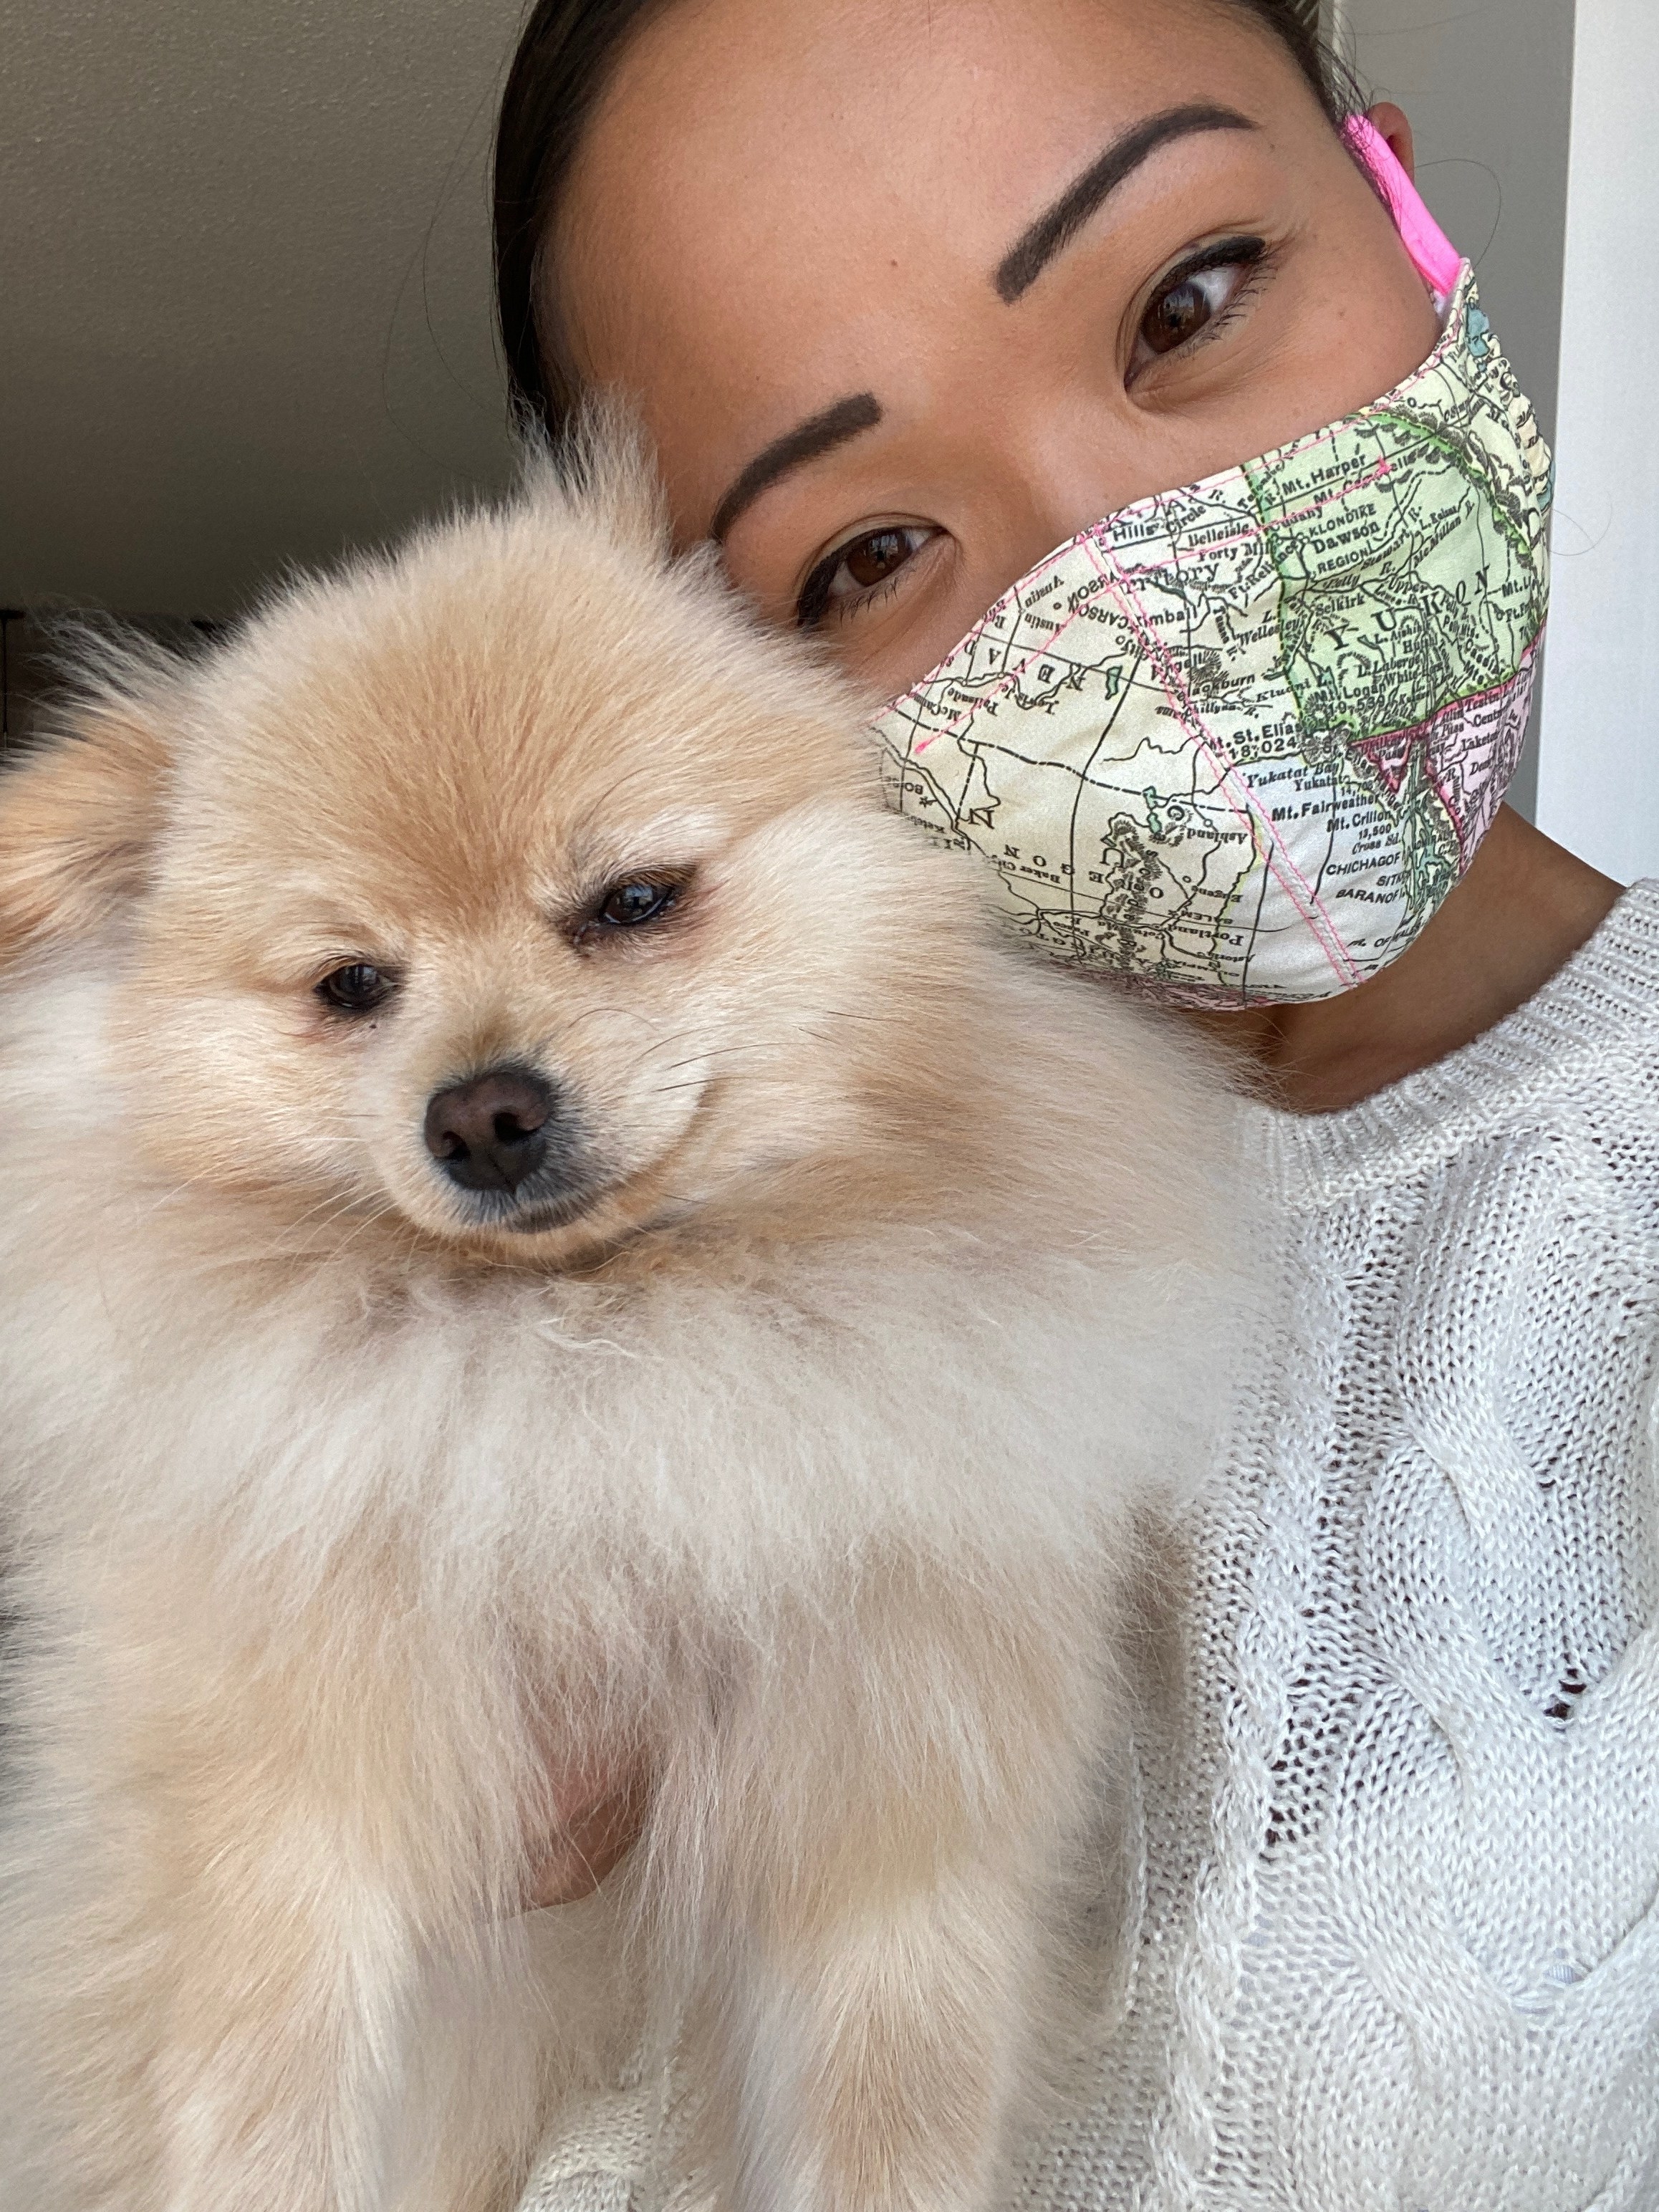 A person wearing a face mask with a map print and holding up a cute puppy